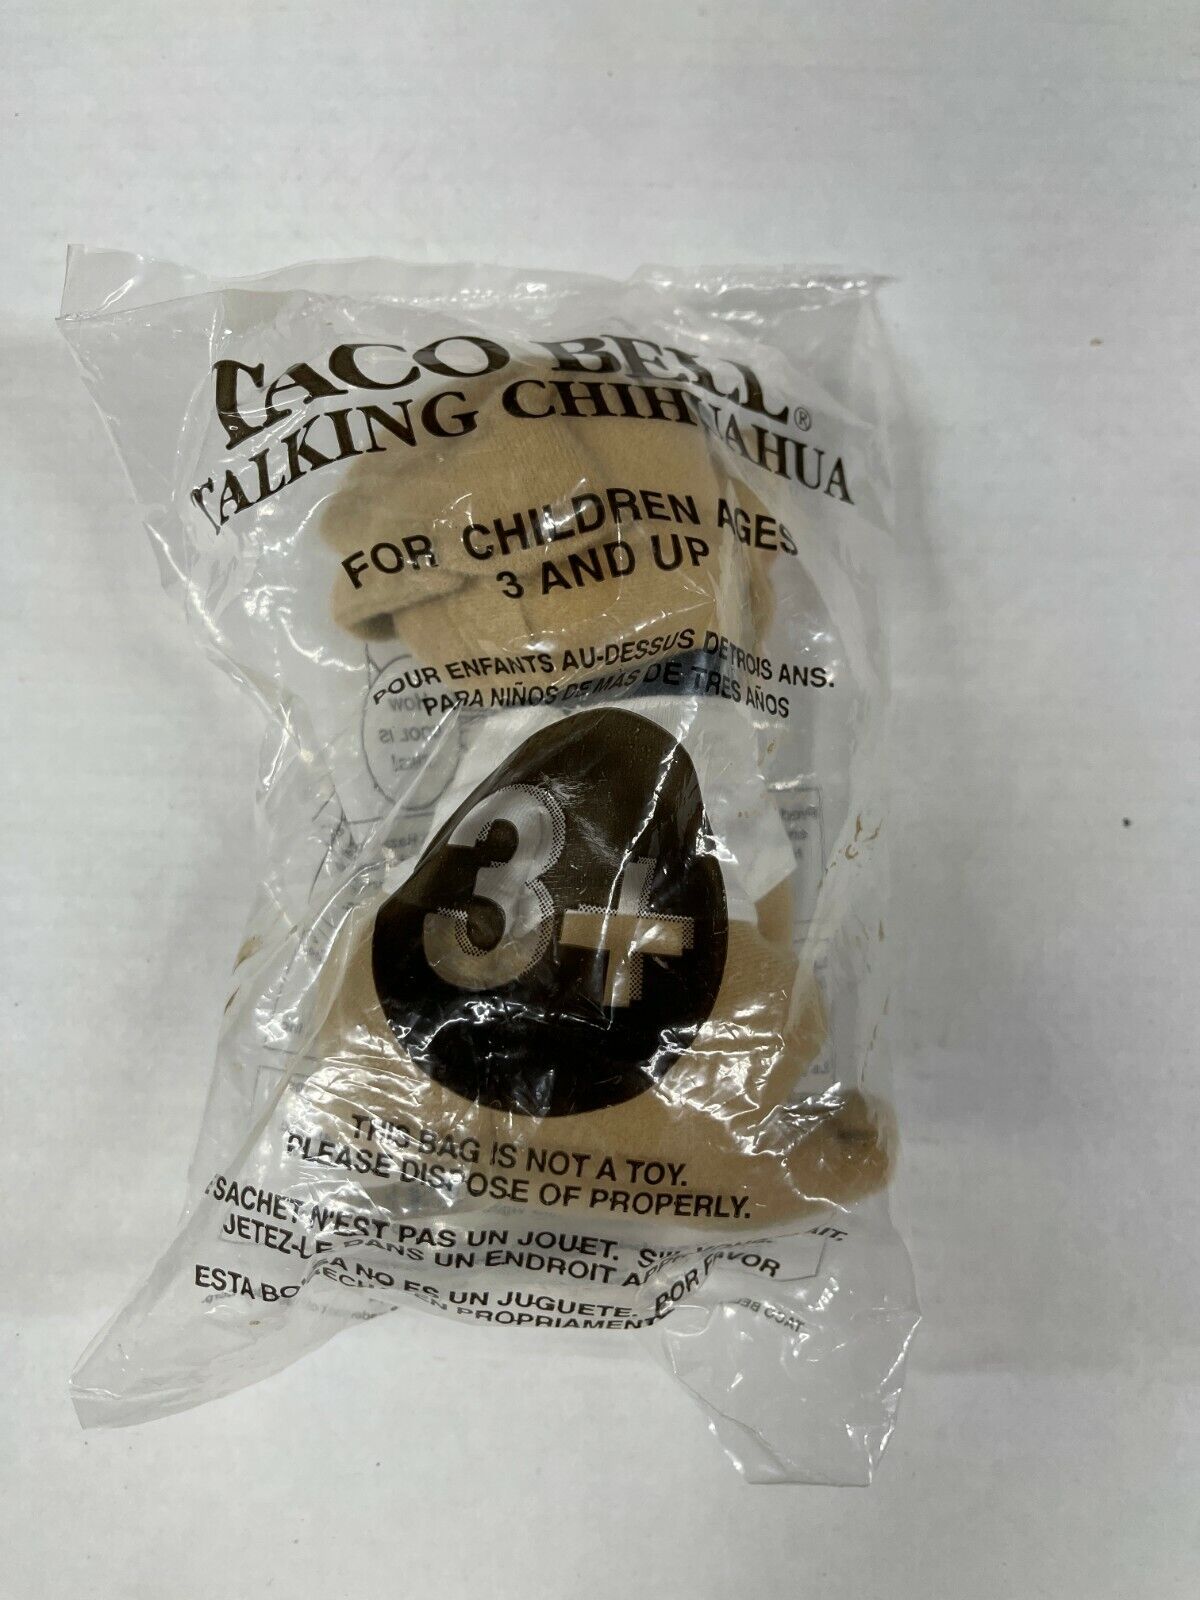 Taco Bell Talking Chihuahua by Applause Sealed